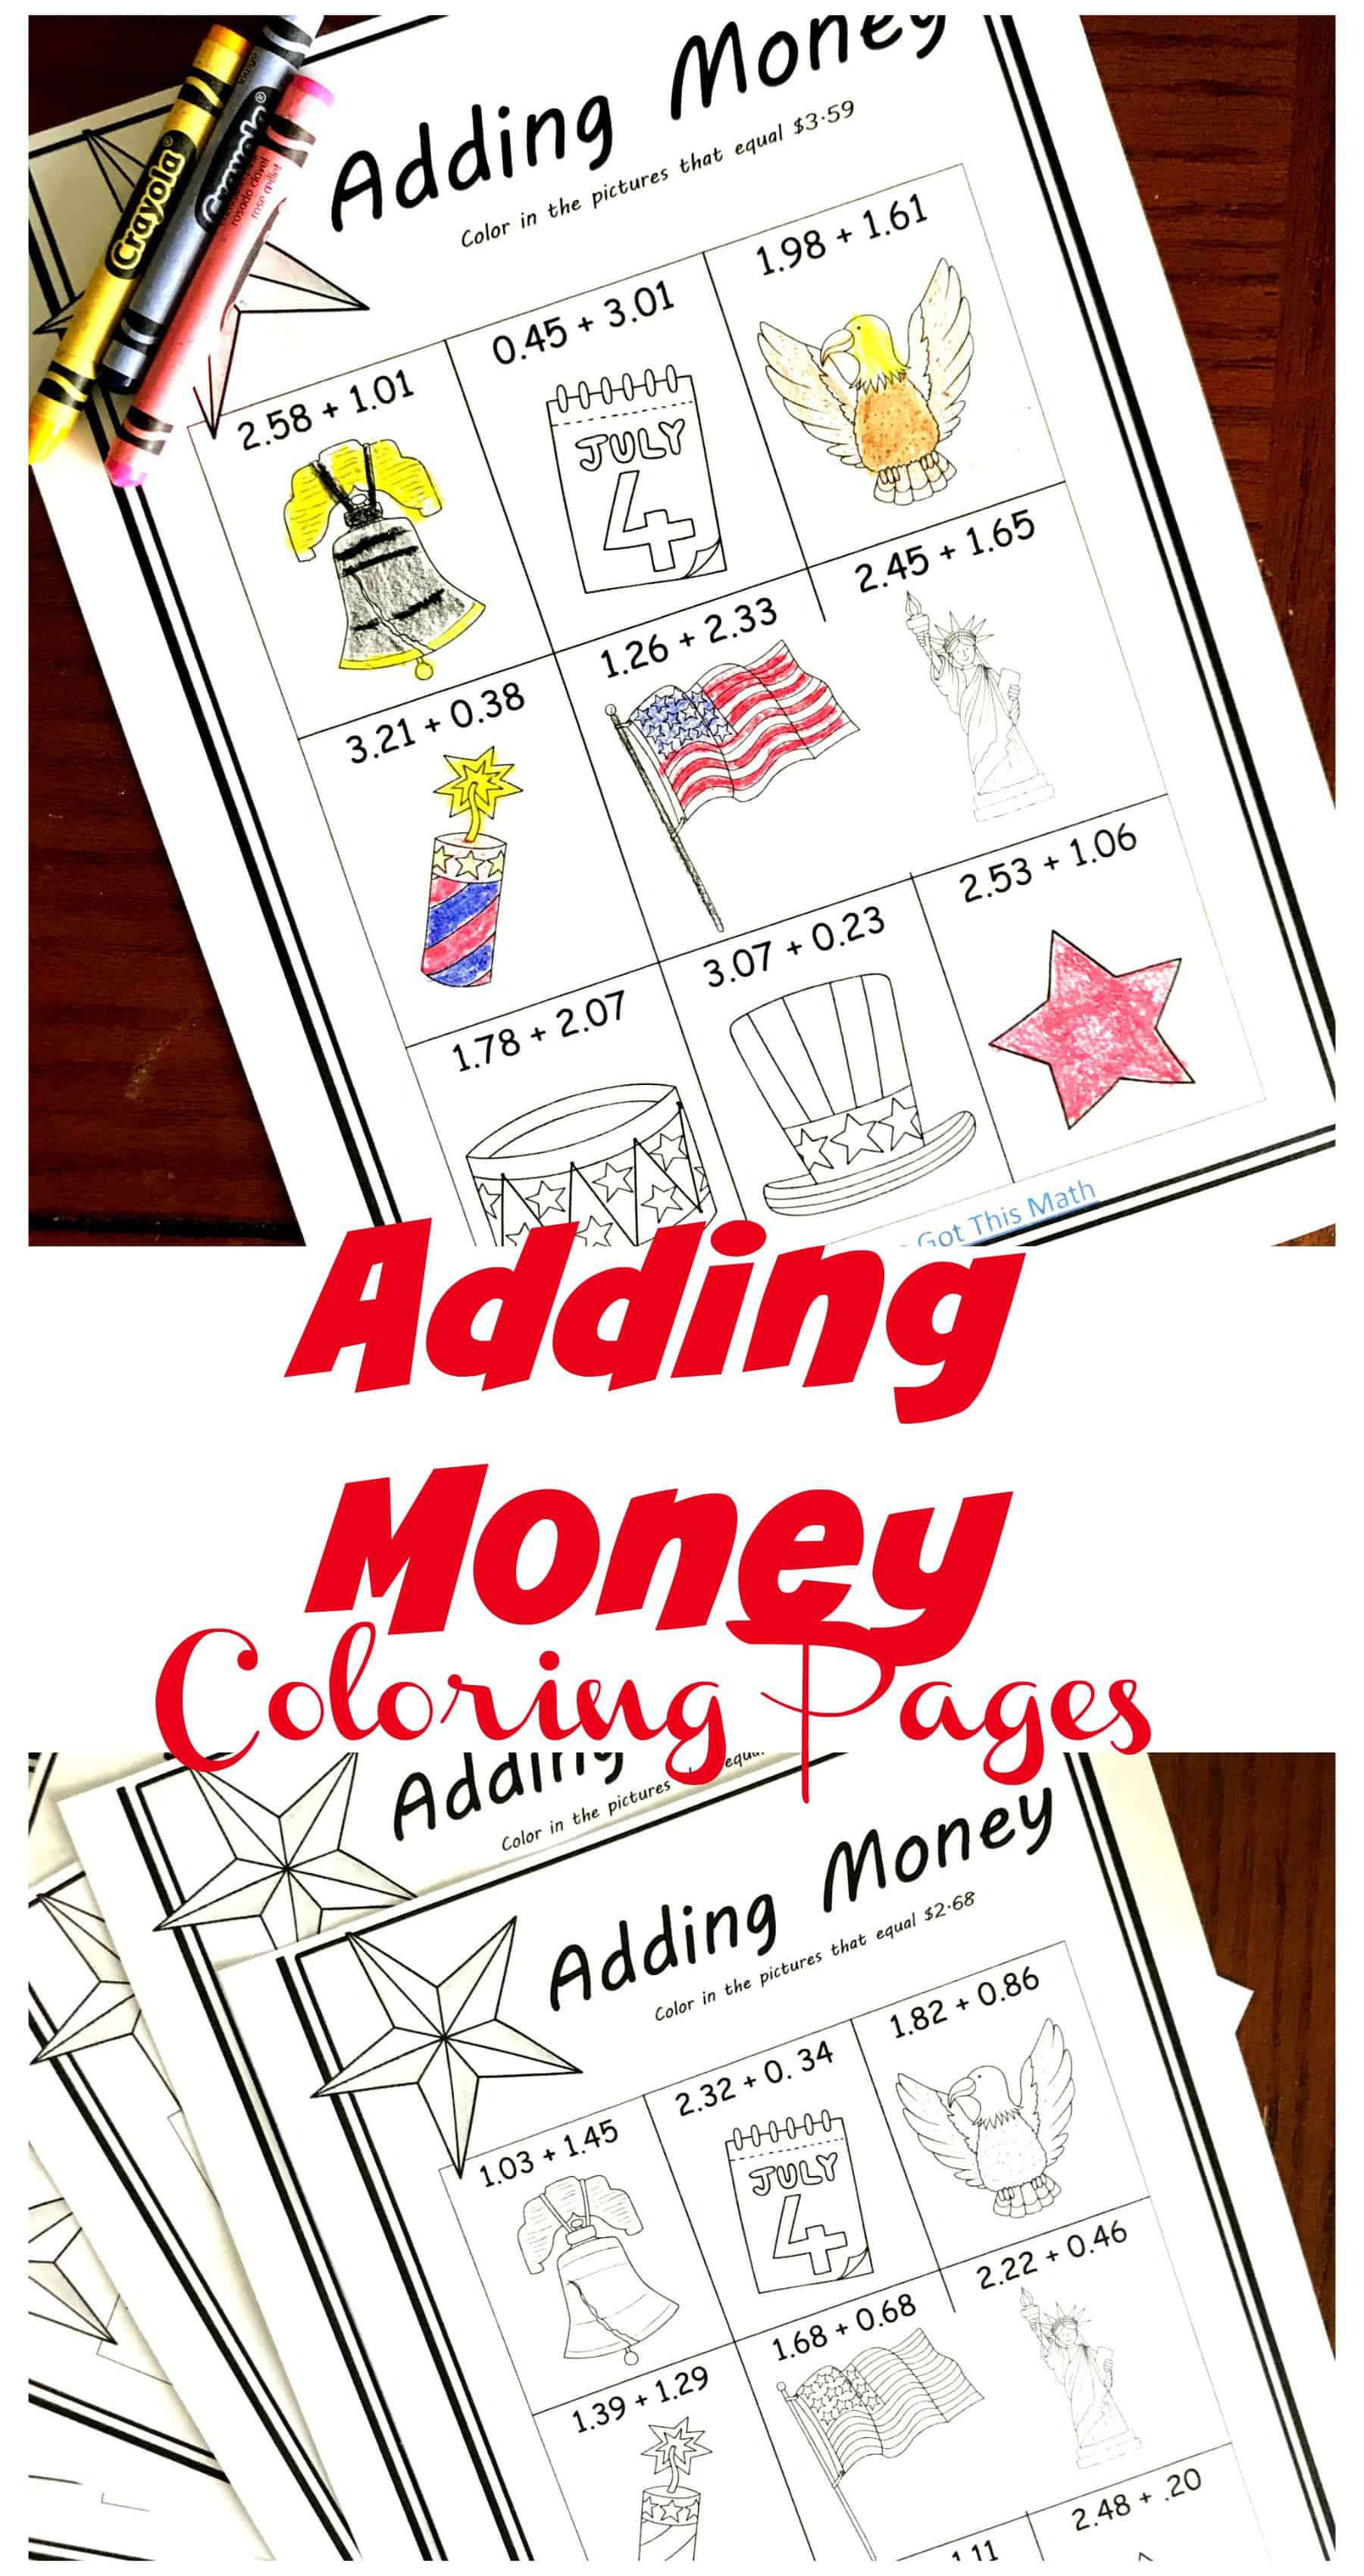 Many children enjoy coloring, and these adding money worksheets allow children to do just that. The students solve adding money problems, and color in all the pictures that equal the same amount.